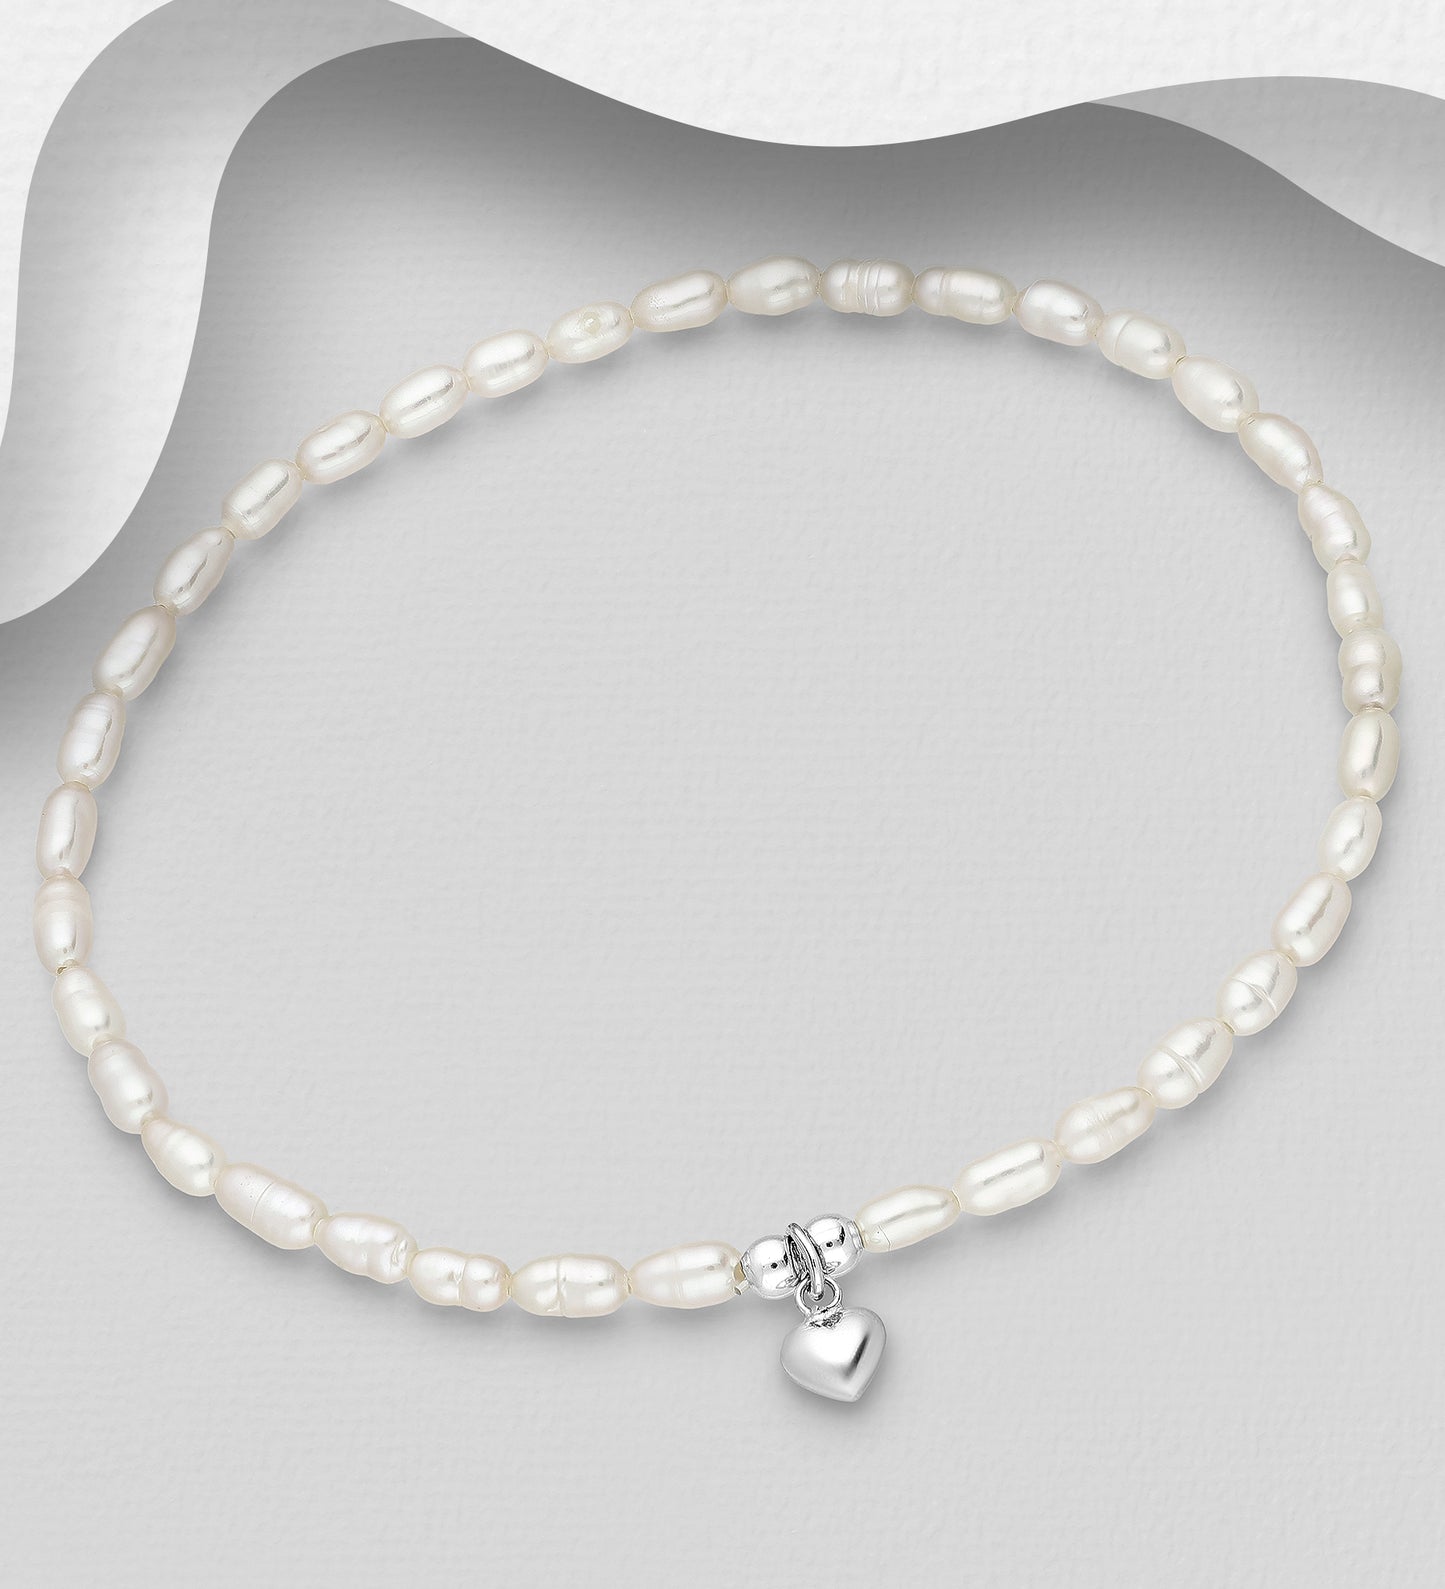 925 Sterling Silver Heart Elastic Bracelet, Beaded with Freshwater Pearls, Shape and Size Will Vary.